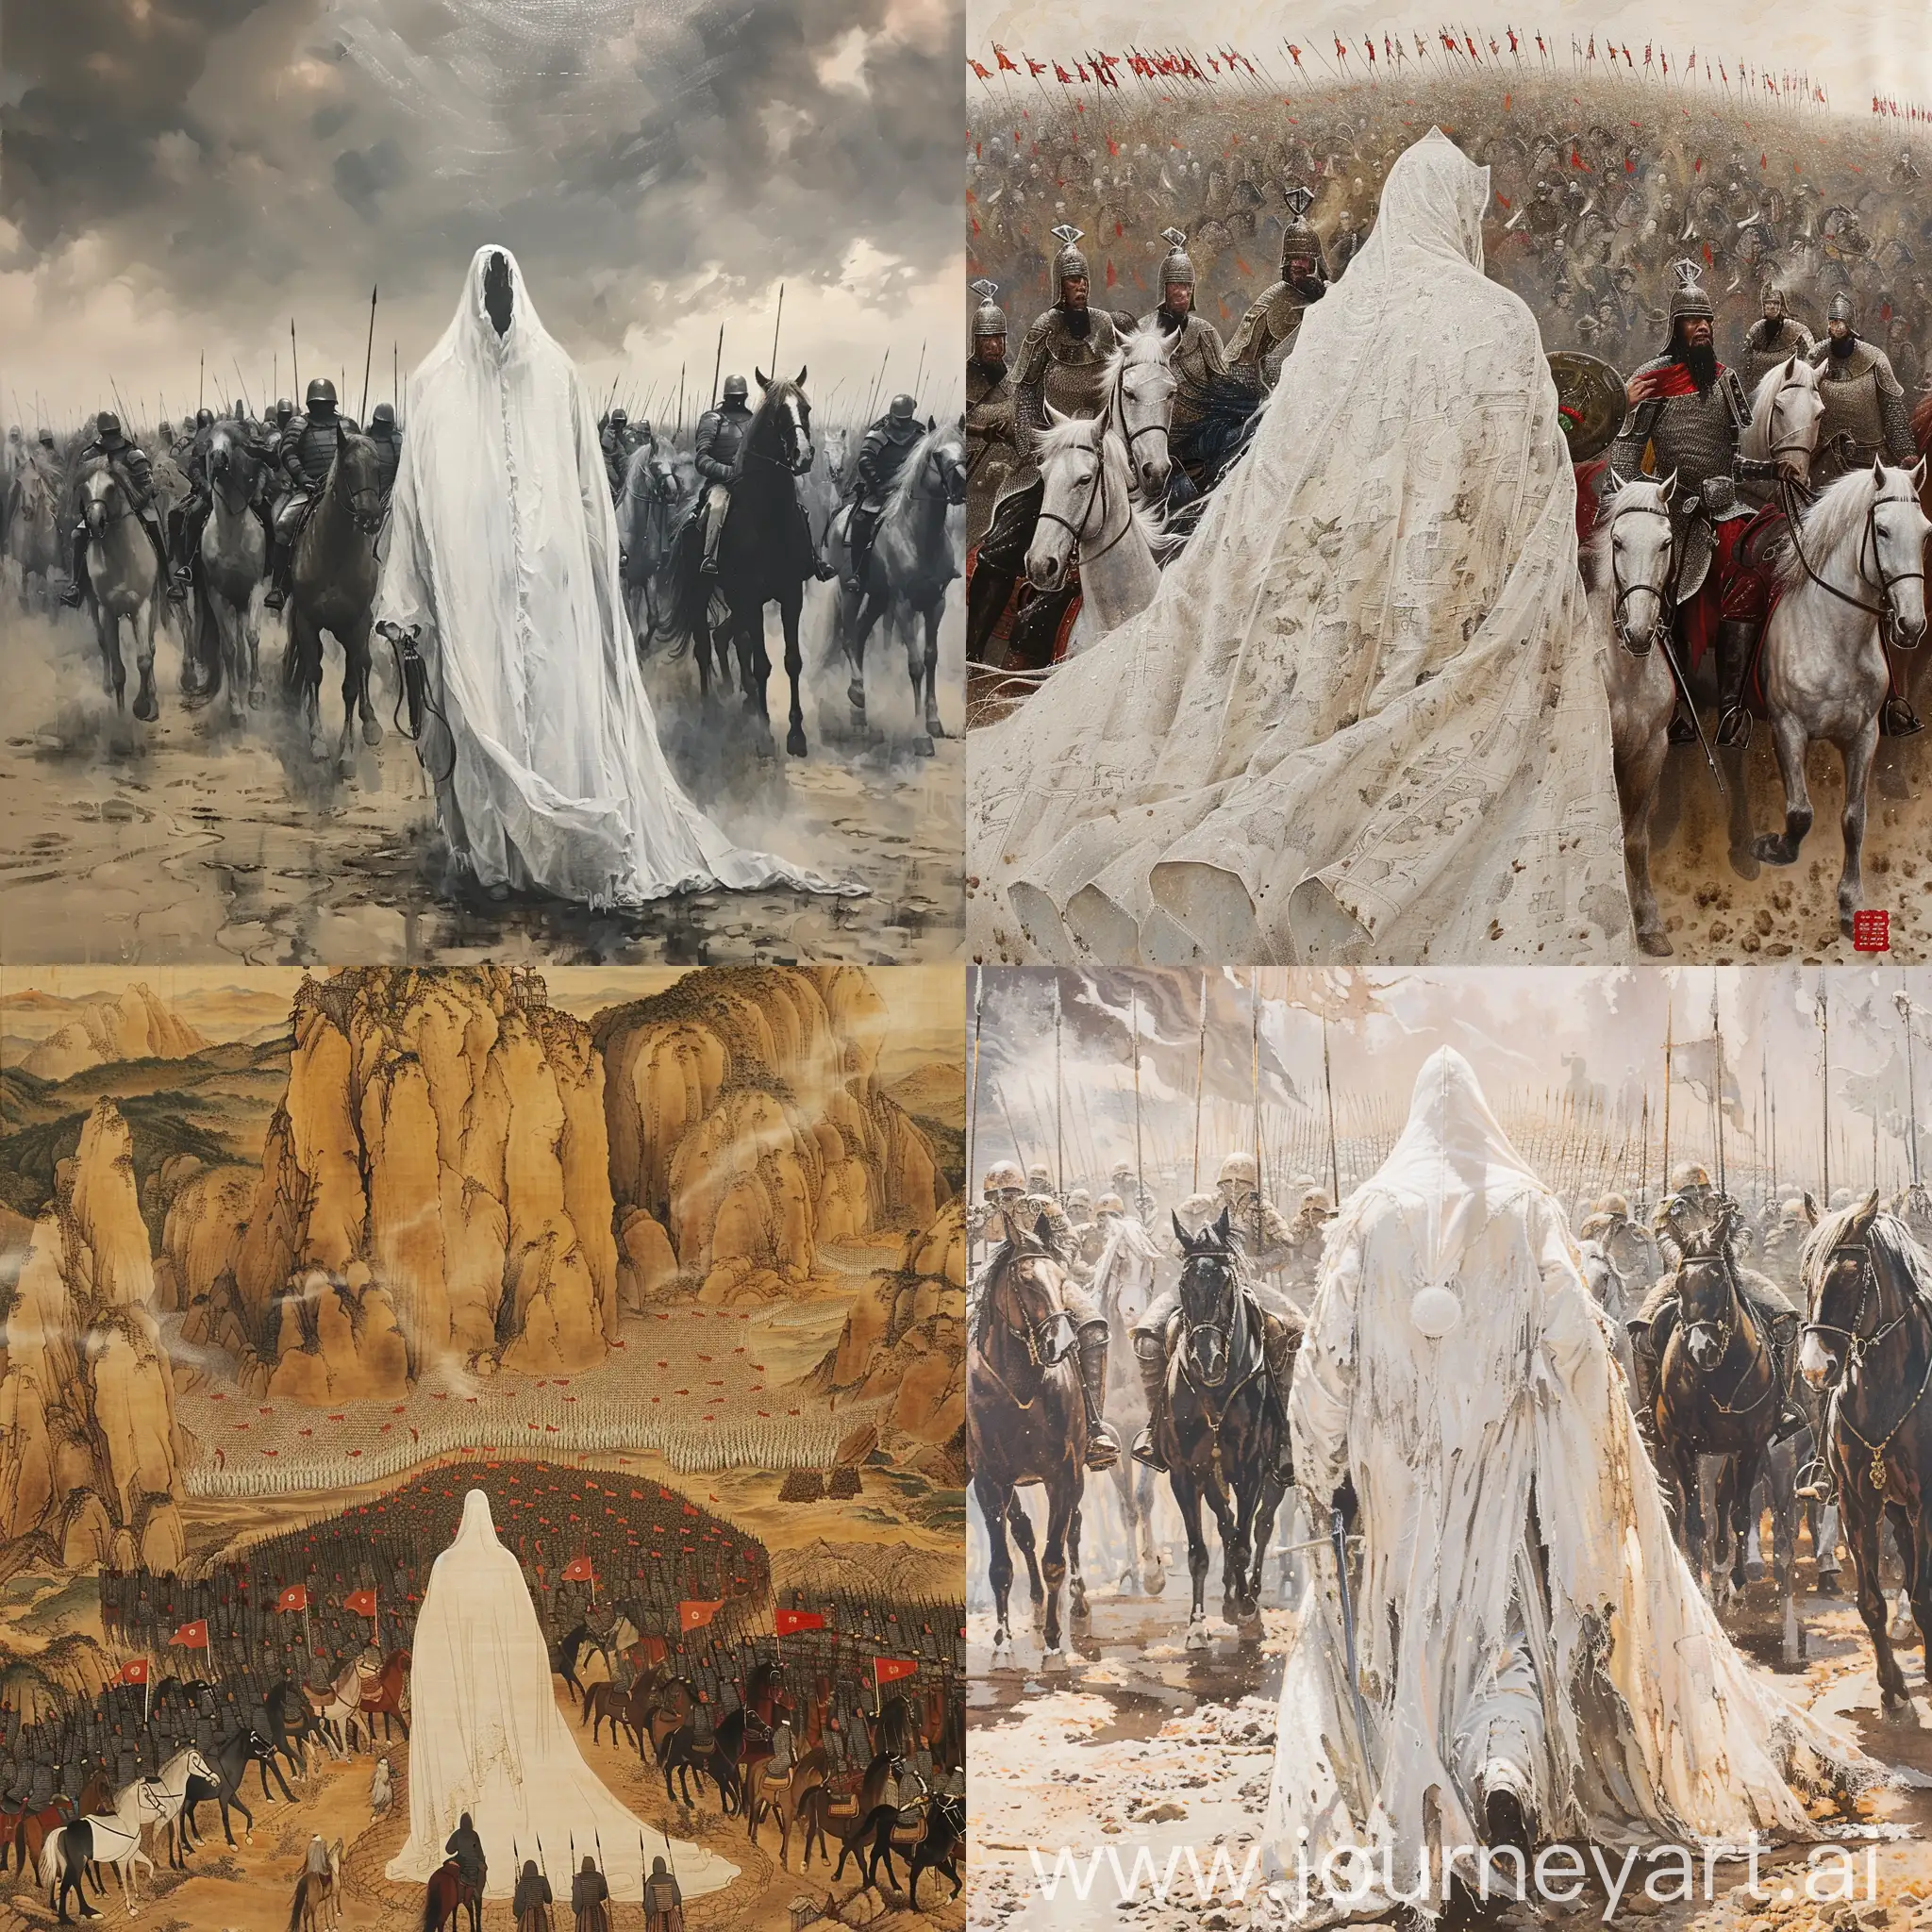 Majestic-White-Robed-Commander-Leading-a-Thousand-Troops-and-Horses